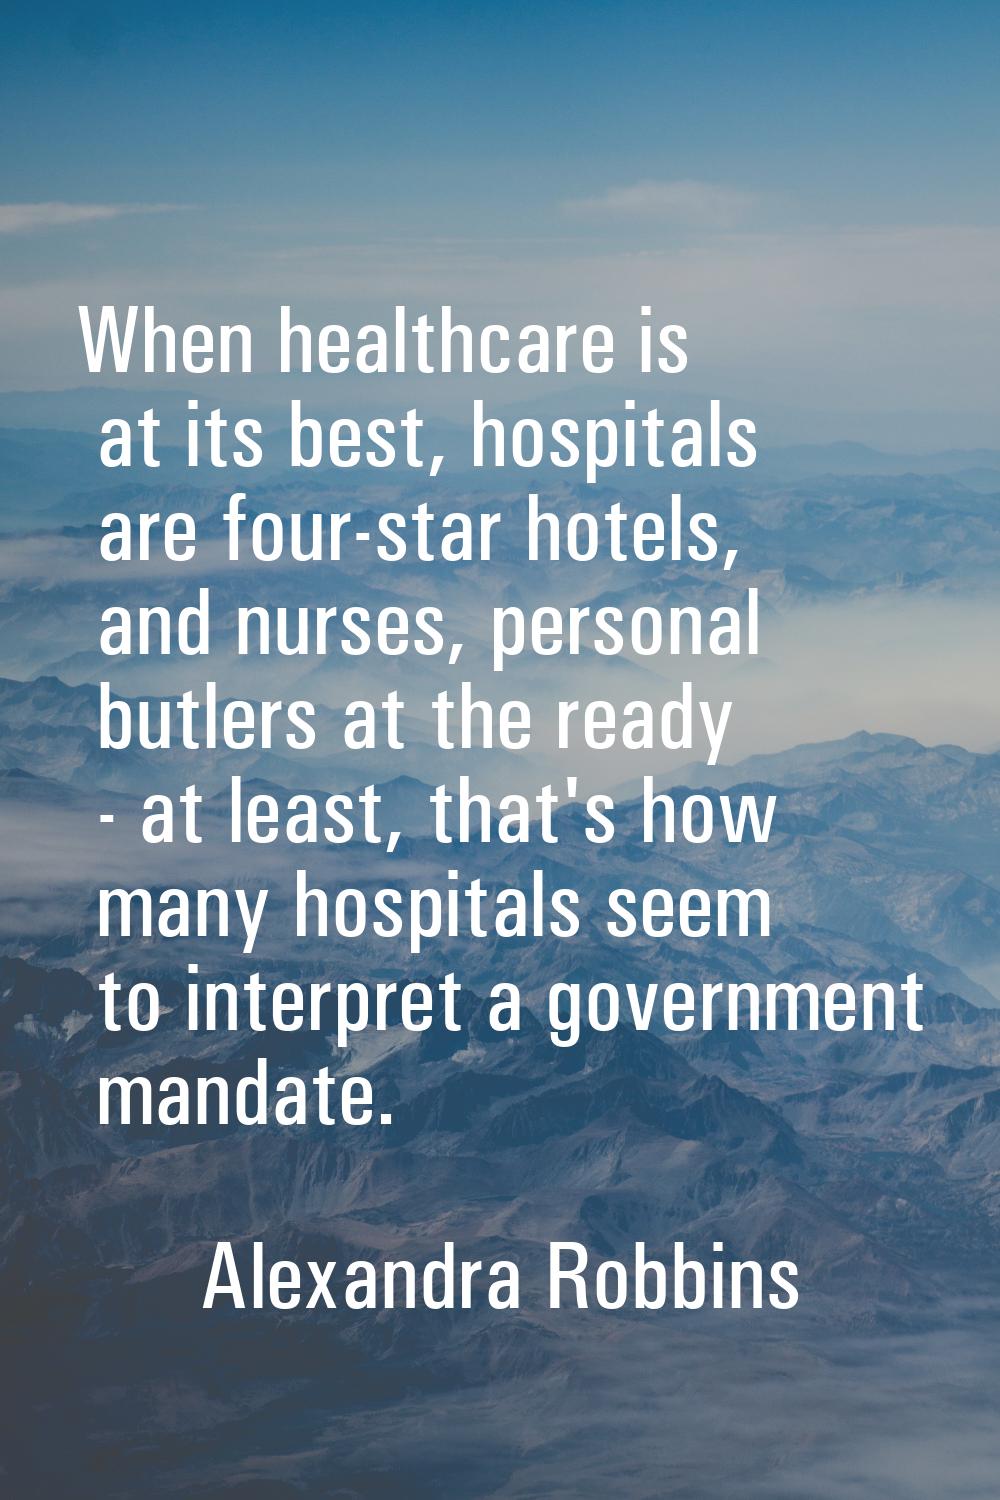 When healthcare is at its best, hospitals are four-star hotels, and nurses, personal butlers at the